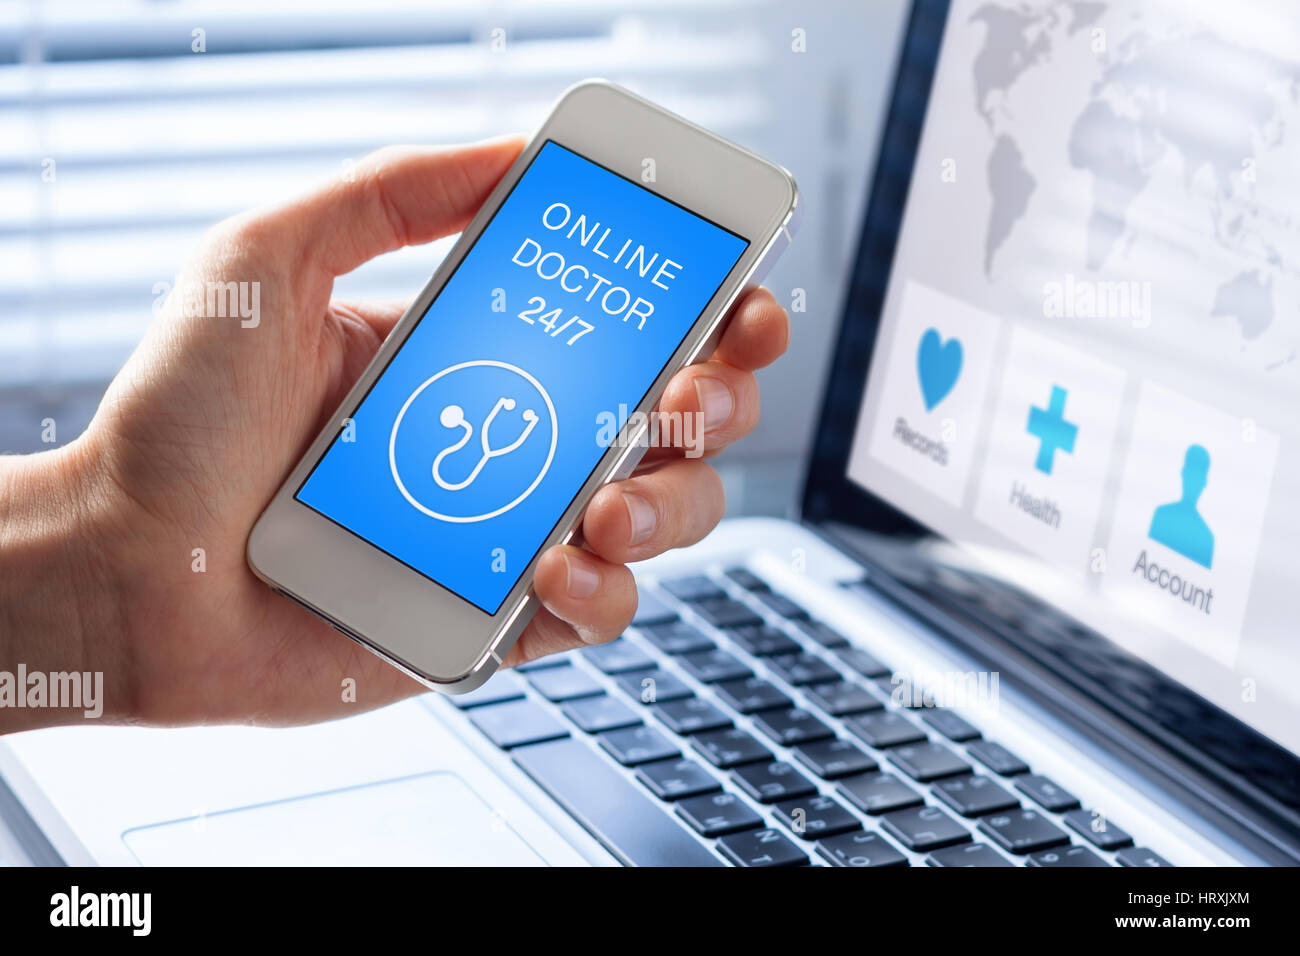 Online medical doctor and health care app on mobile phone concept with person showing smartphone screen, remote diagnosis or consultation Stock Photo